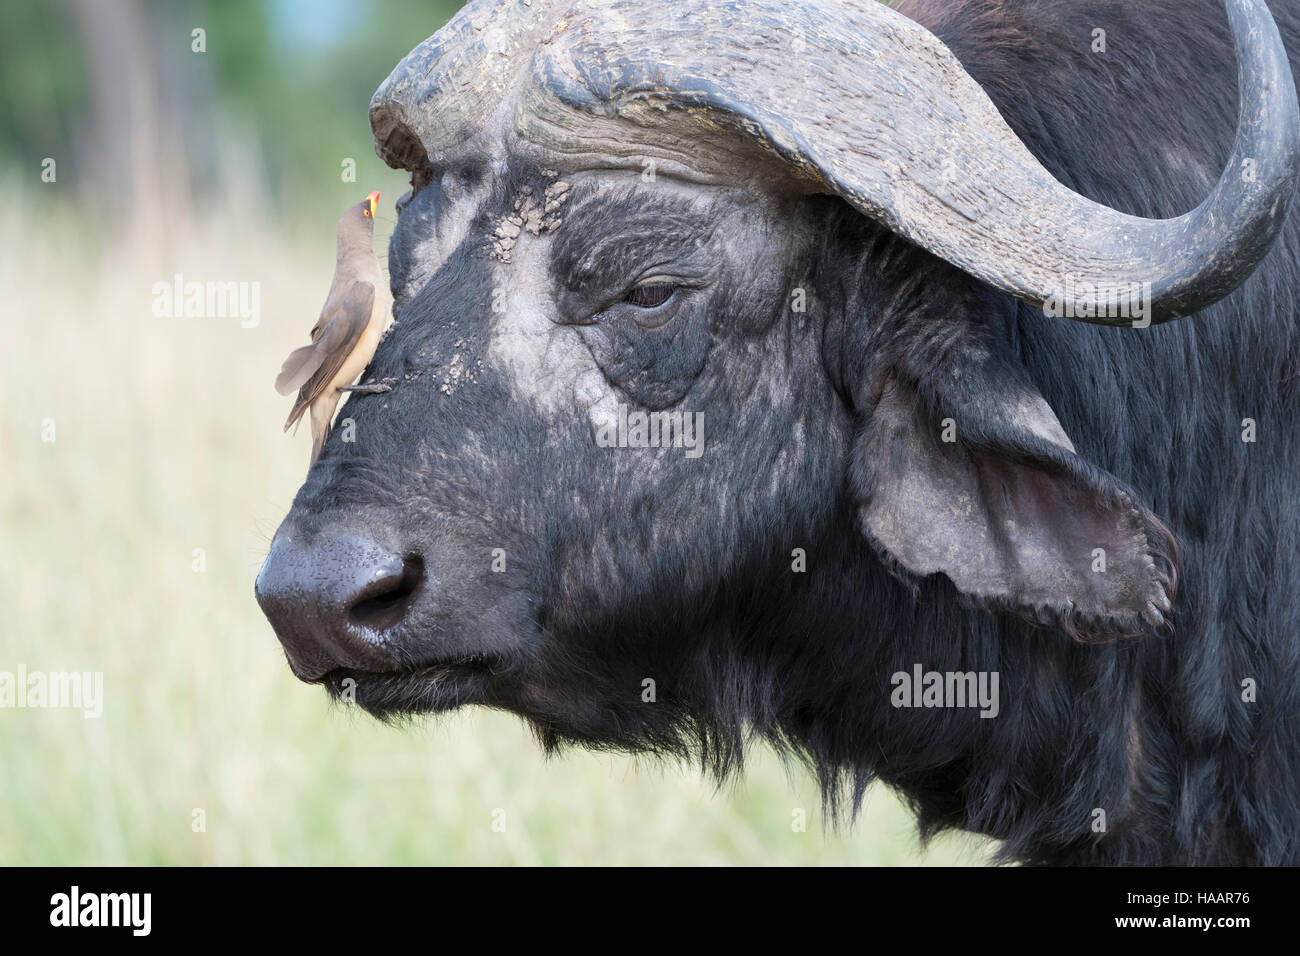 Cape buffalo (Syncerus caffer) with Yellow-billed oxpeckers (Buphagus africanus) on its head, Maasai Mara National Reserve, Kenya Stock Photo